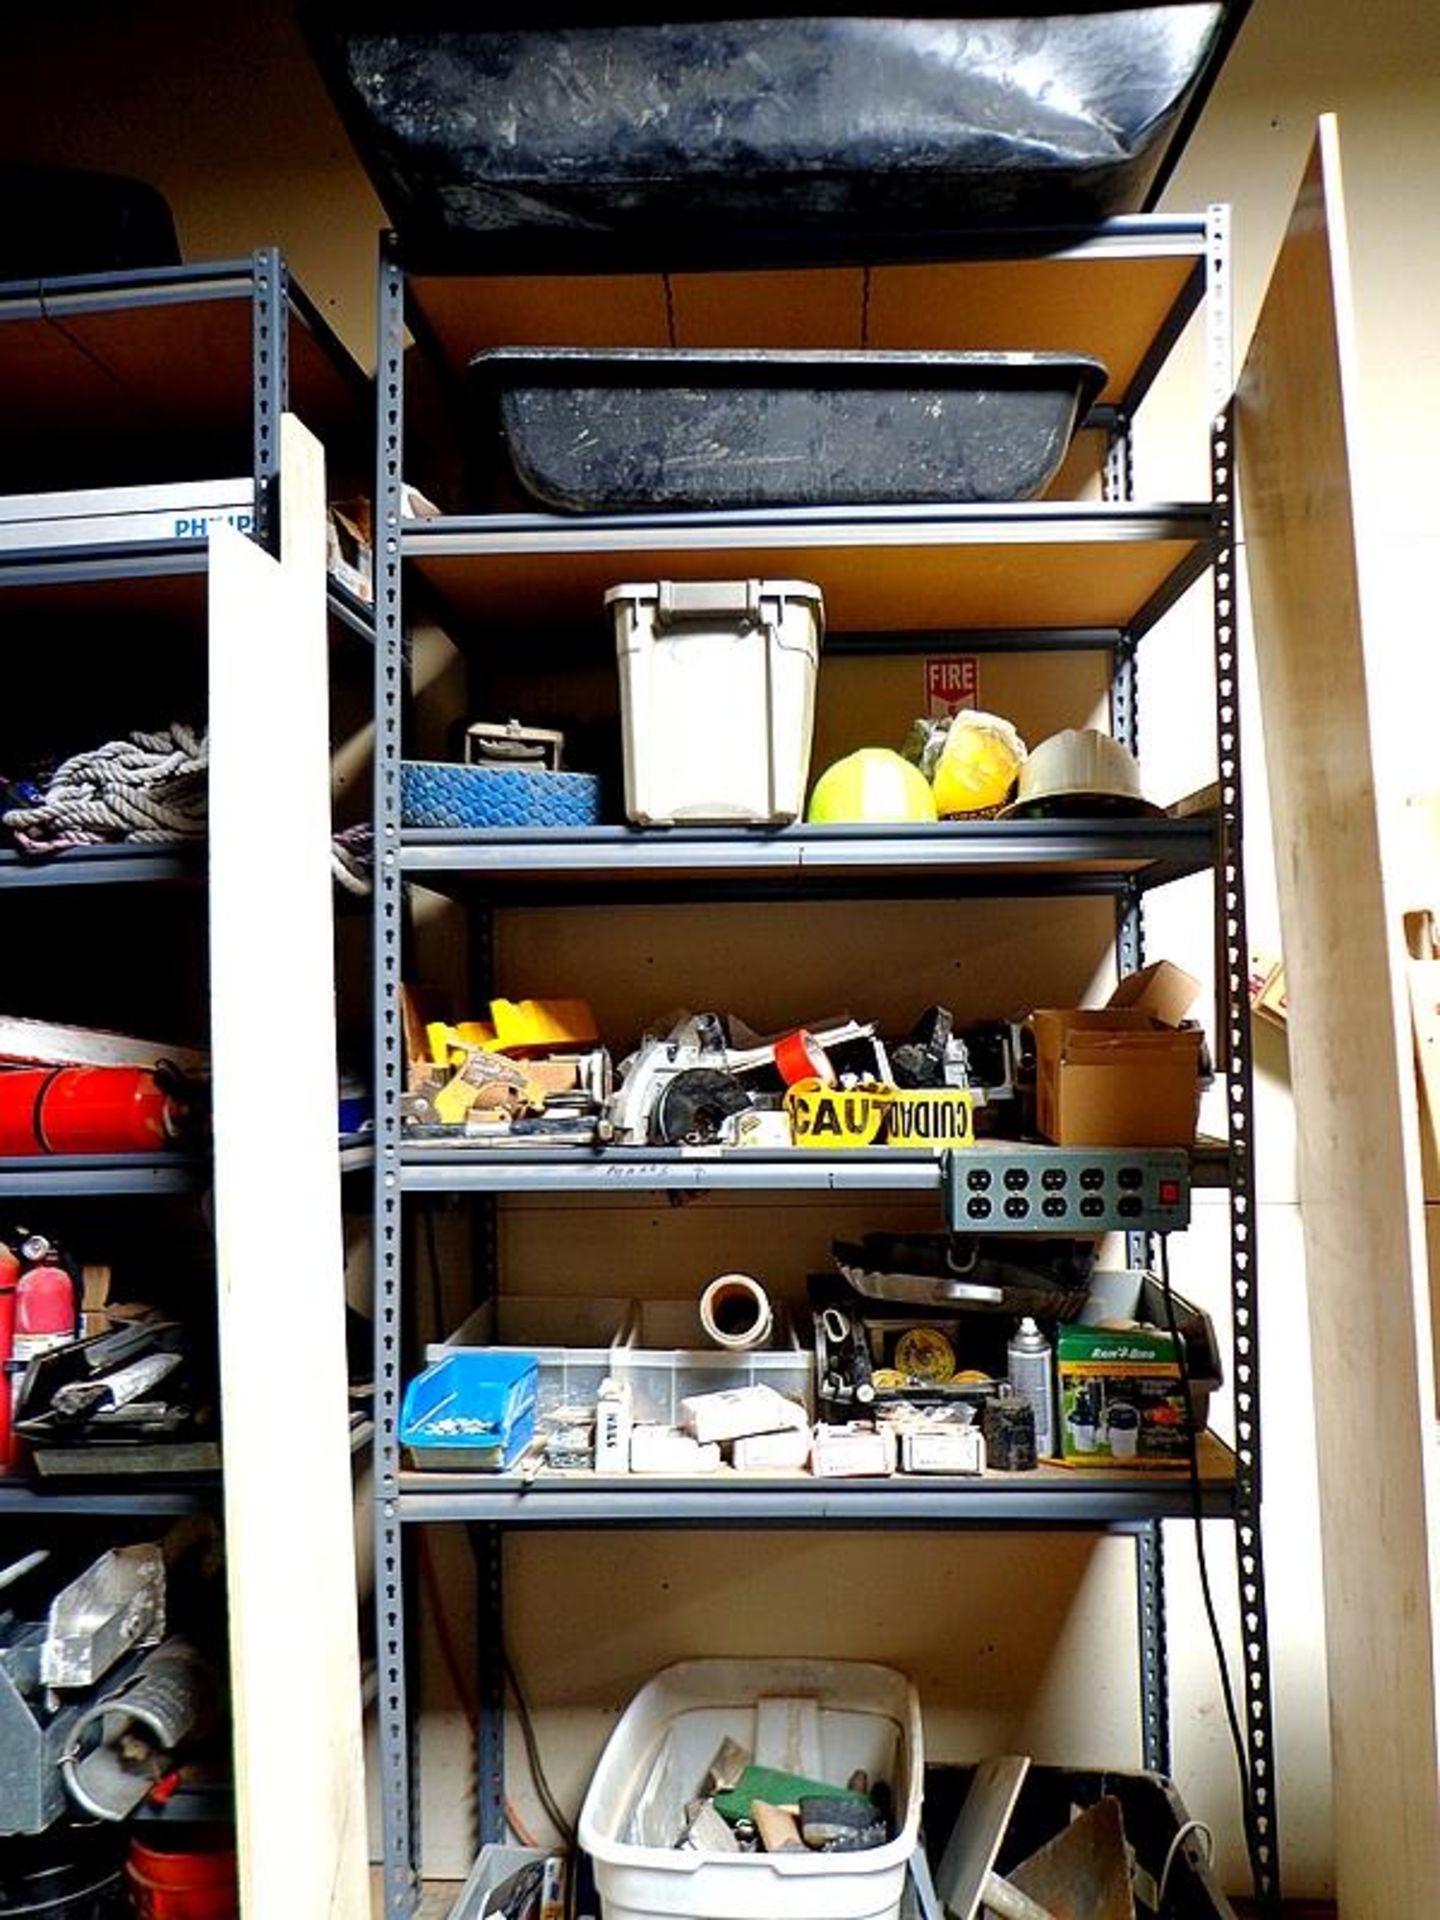 LOT - ASSORTED ITEMS- CONTENTS ONLY - RACKS NOT IN SALE; SAND PAPER, SCREWS, DUST PANS, CAUTION